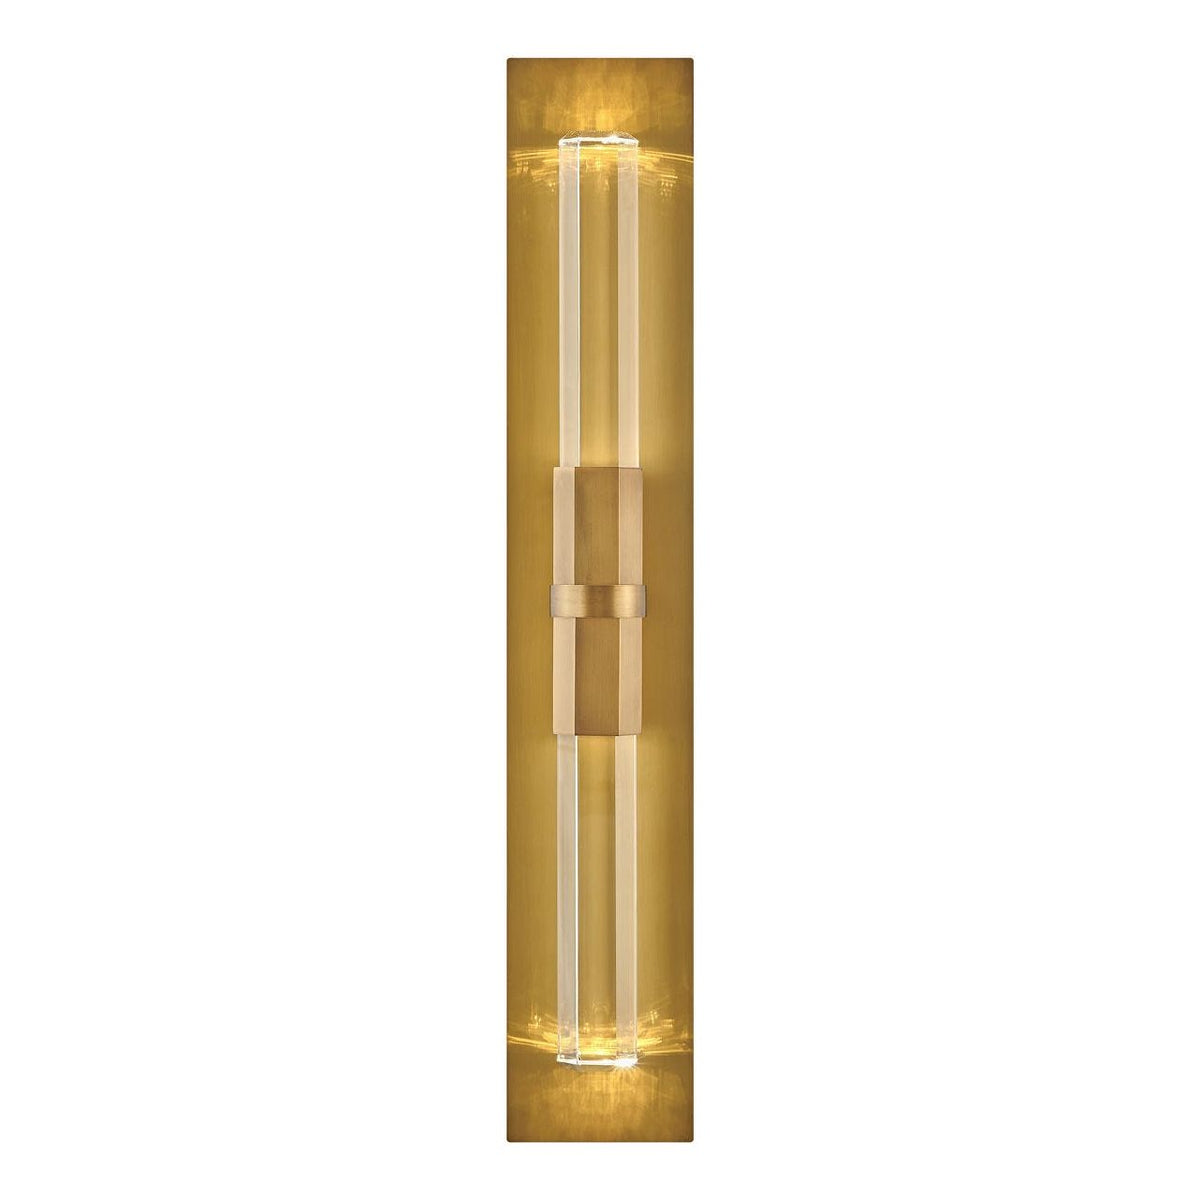 Hinkley Lighting - FR30600HBR - Wall Sconce - Cecily - Heritage Brass